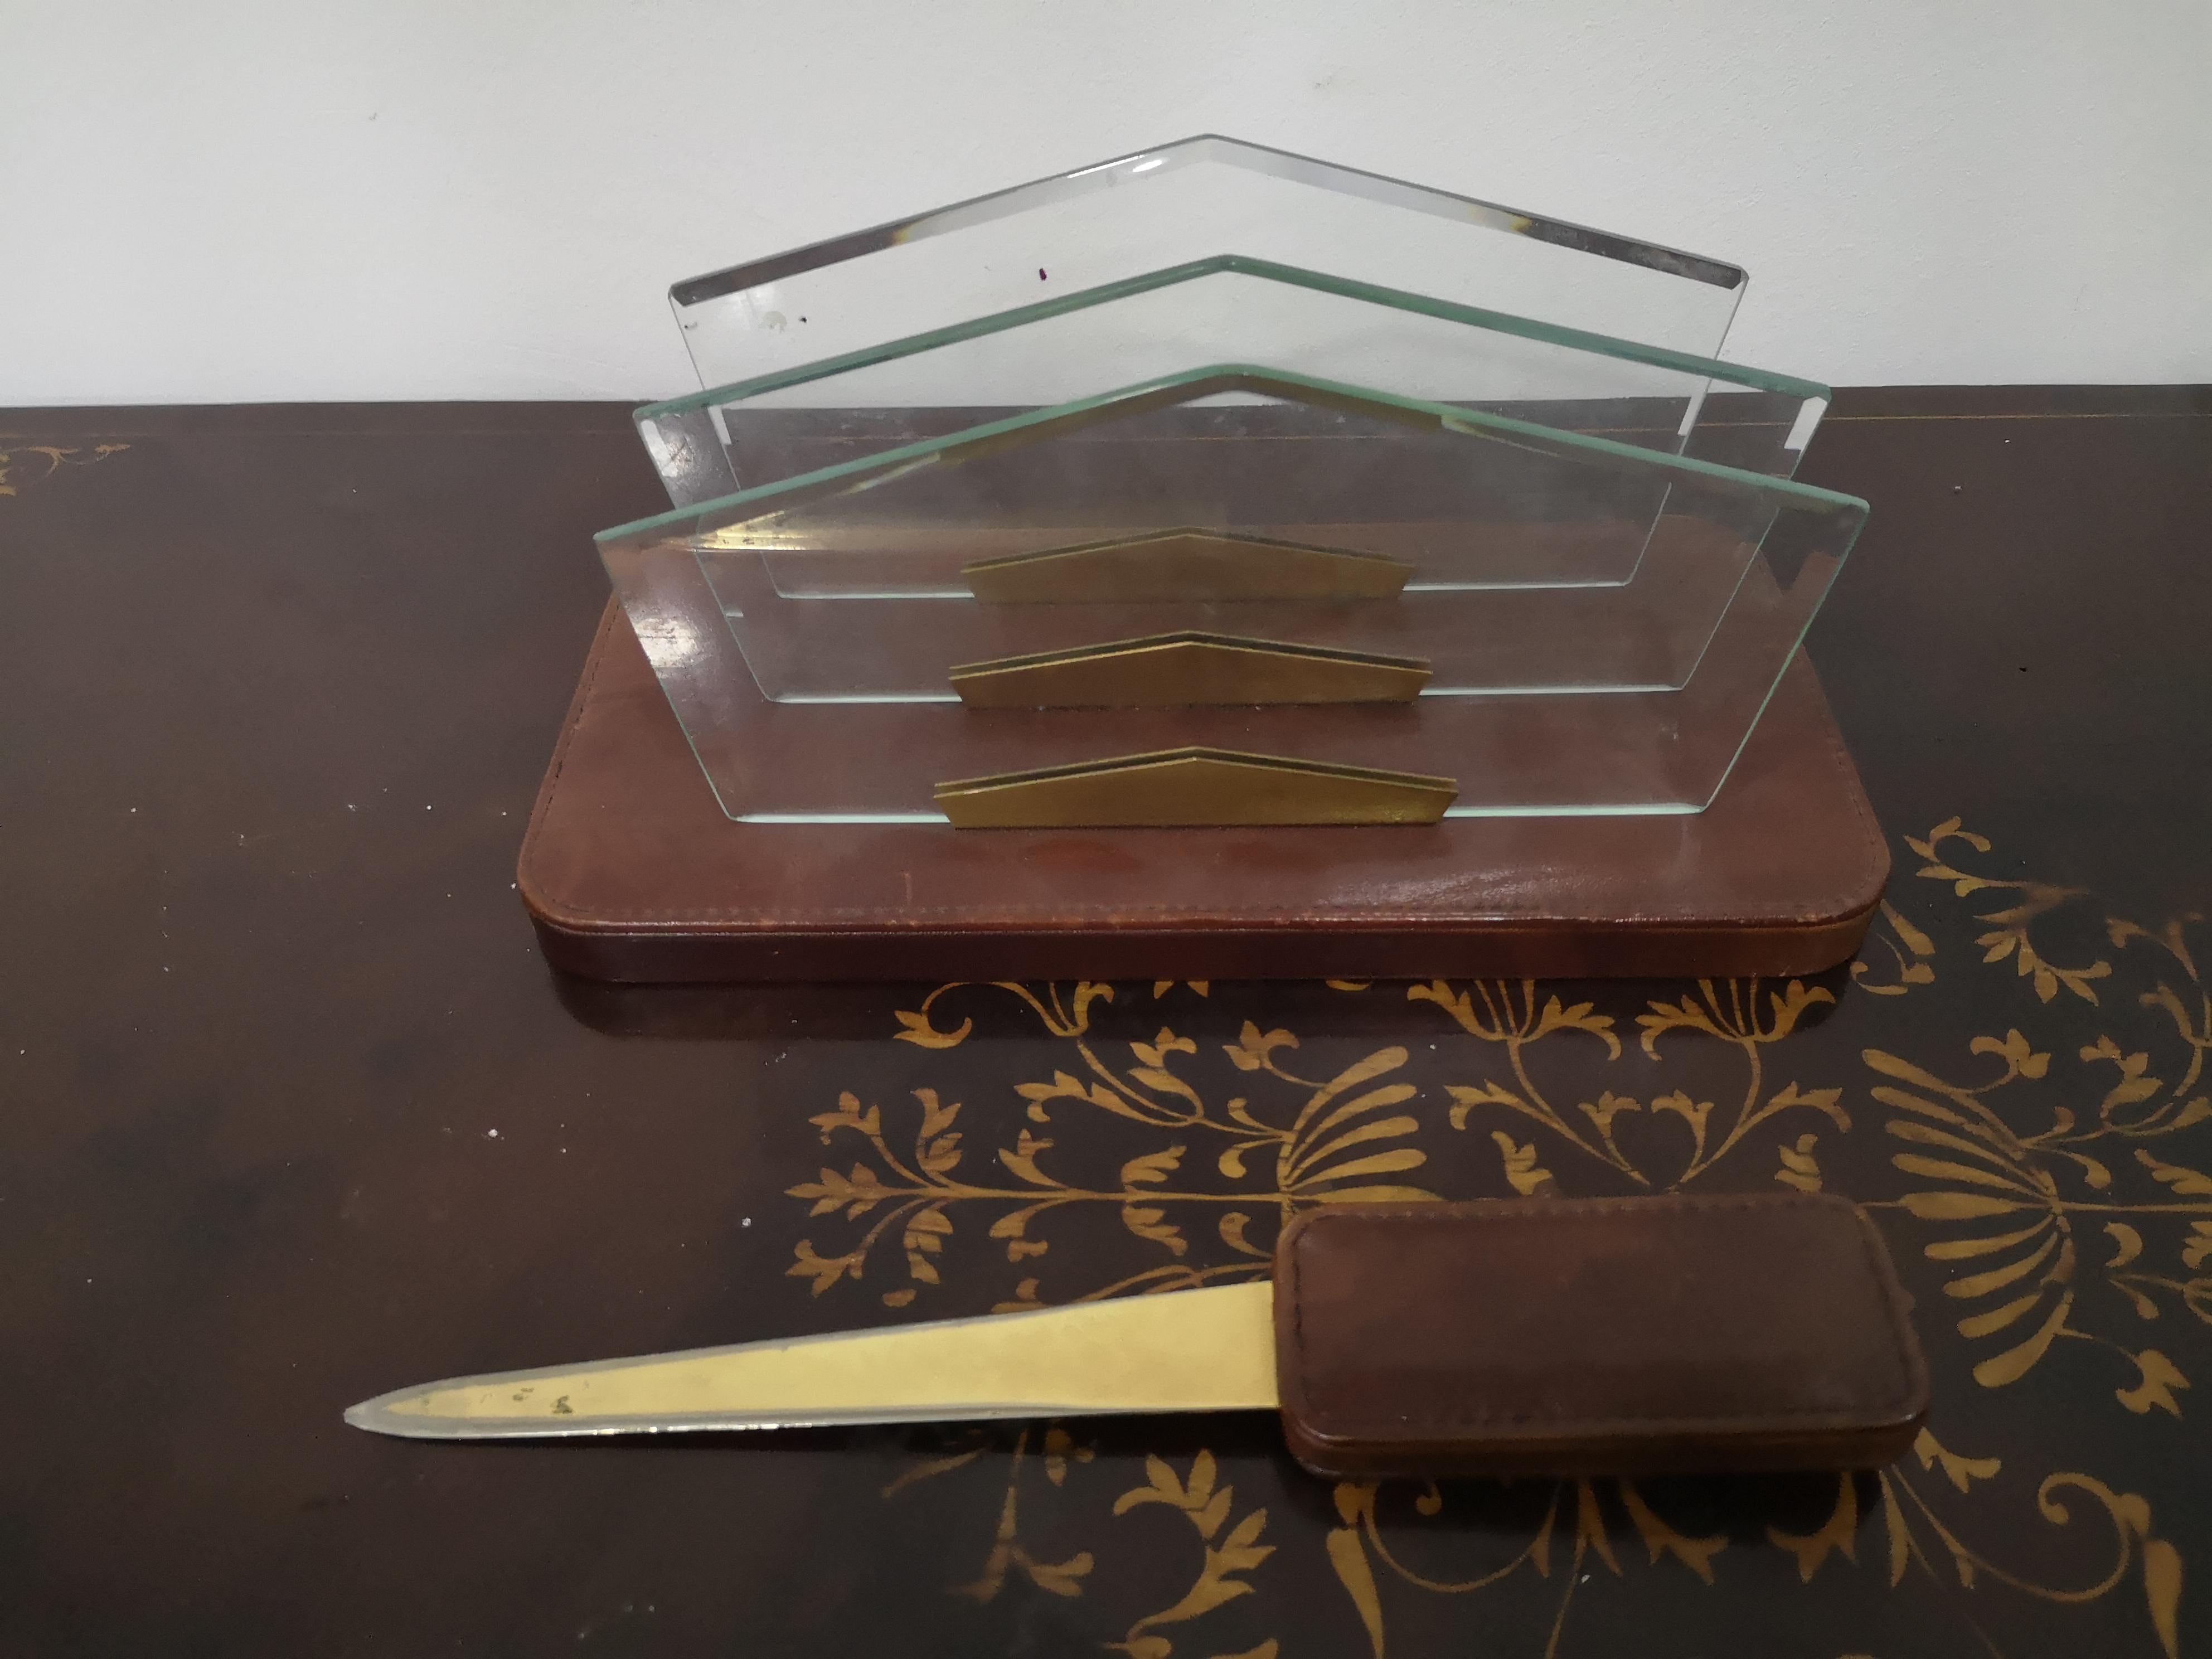 Vintage Fountain Art Style Desk Set 1970s In Excellent Condition For Sale In Catania, IT